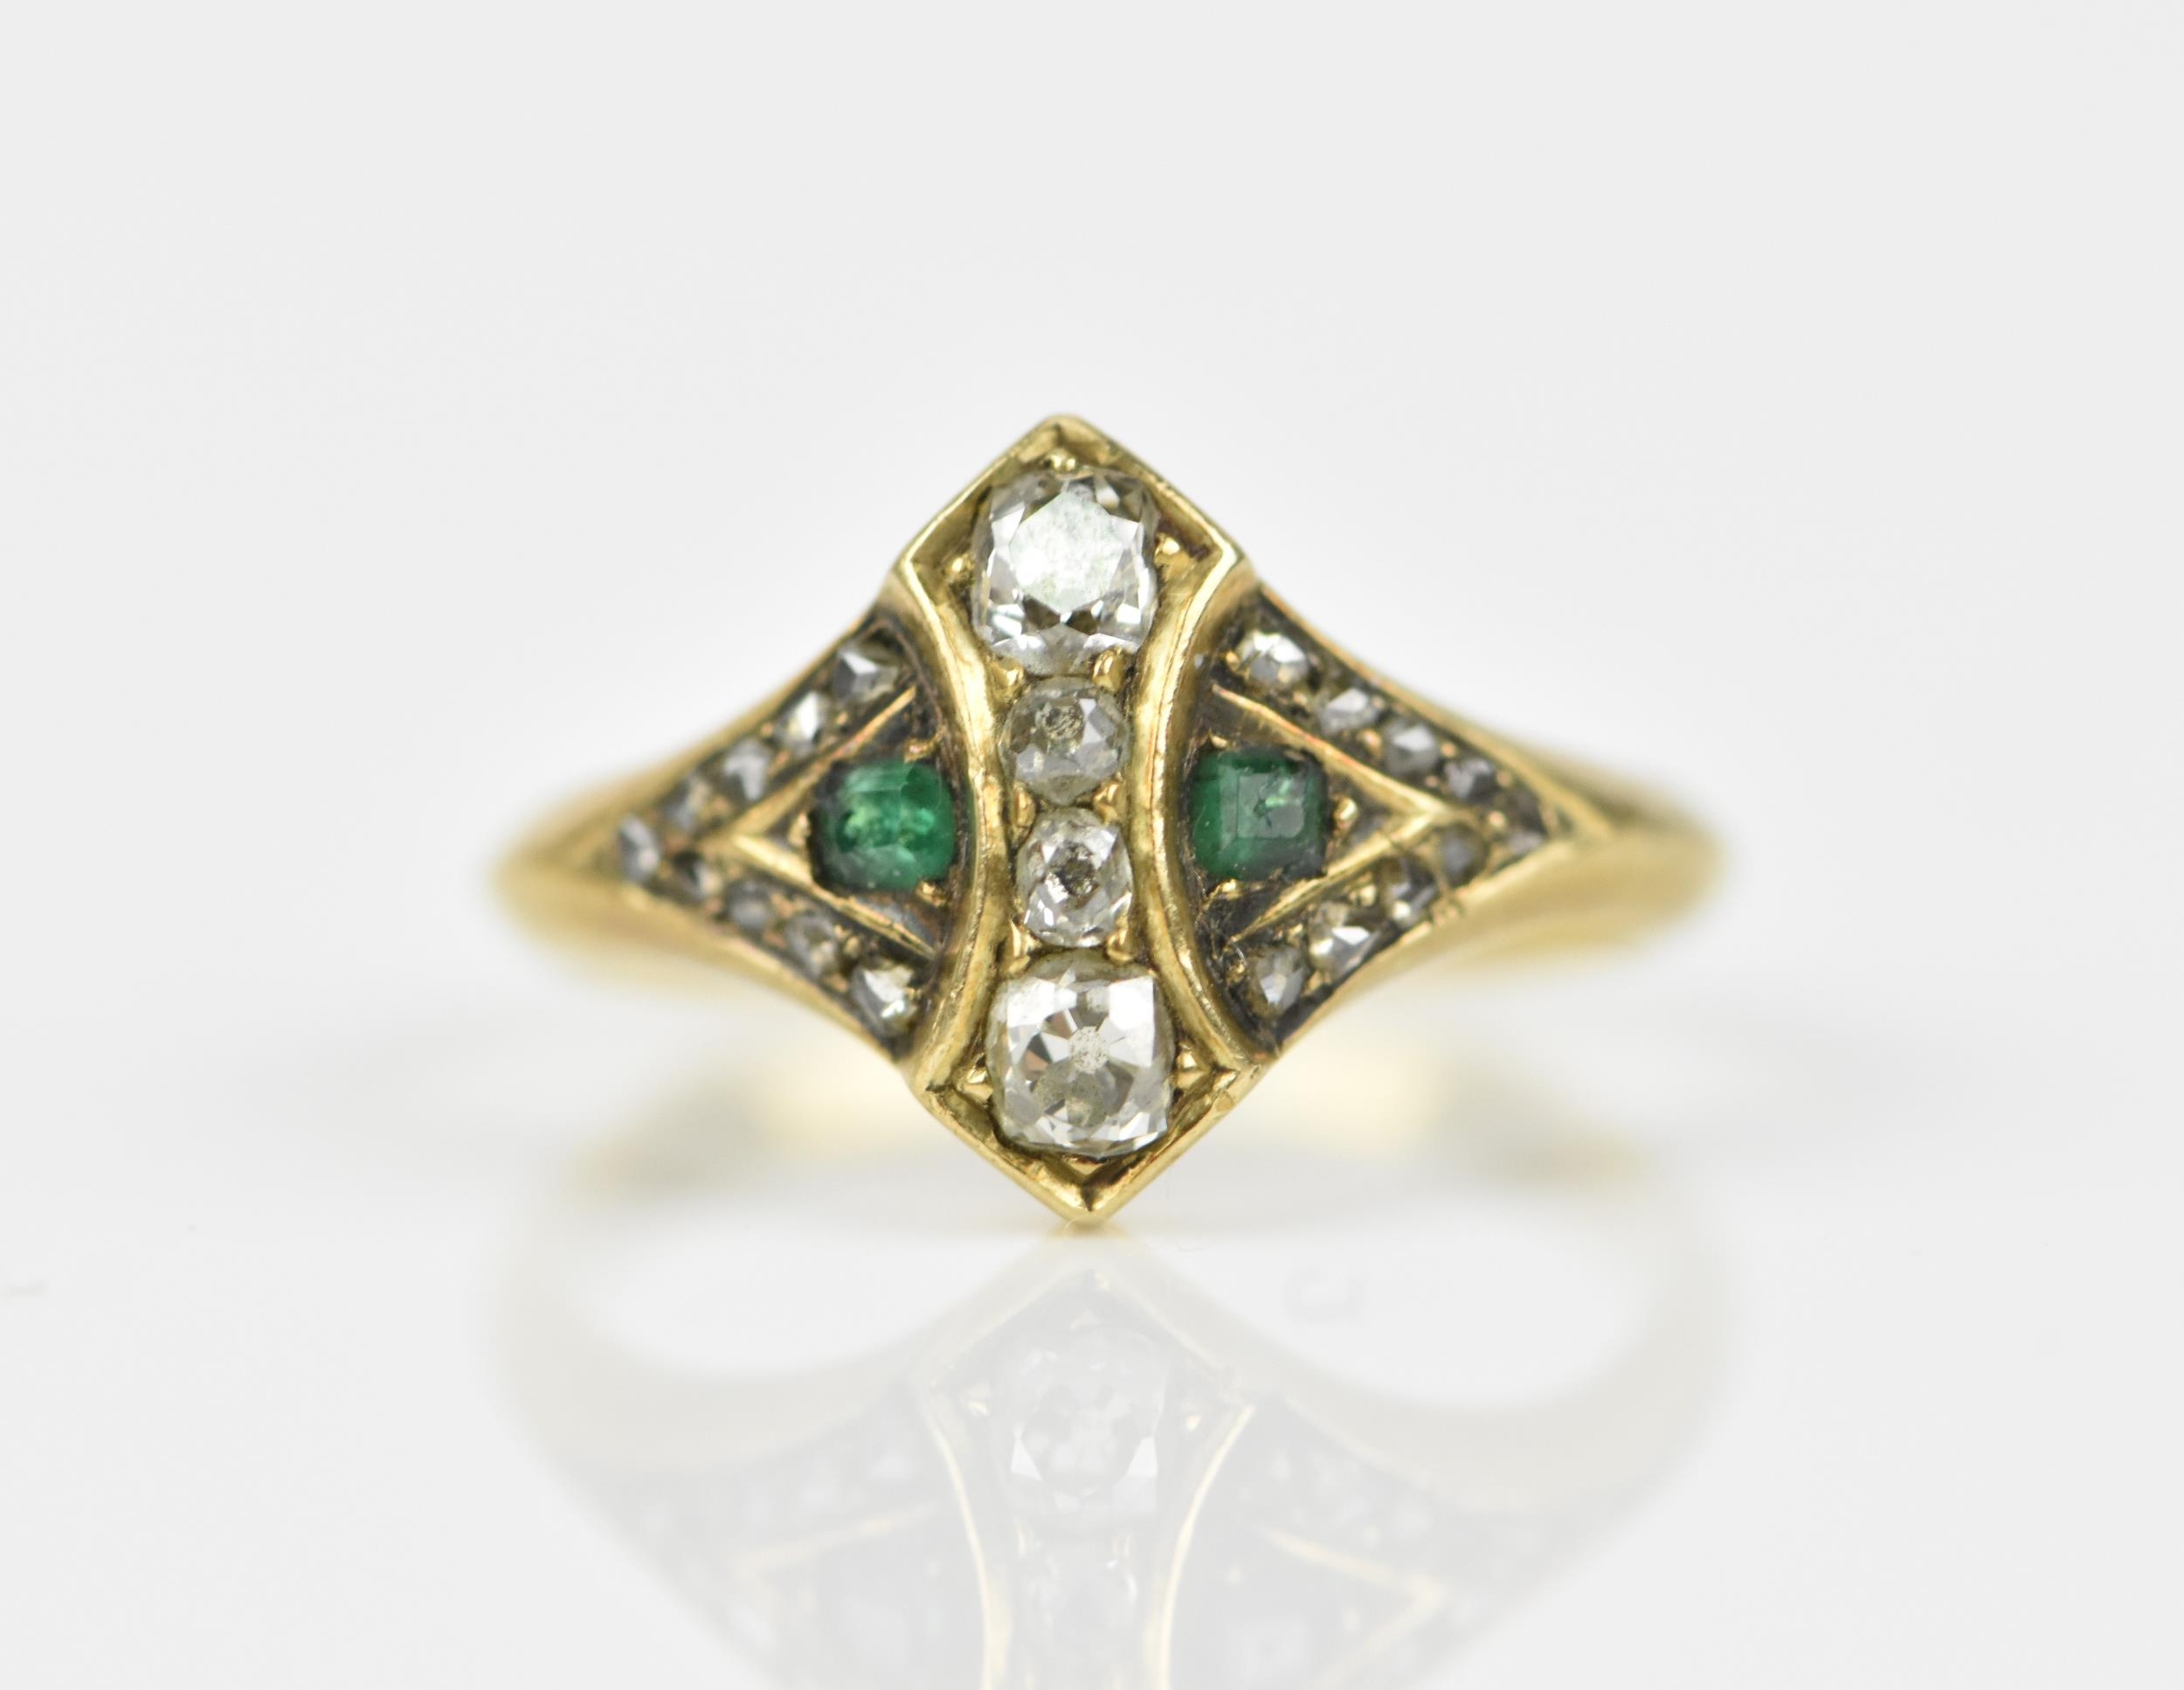 An early 20th century diamond and emerald dress ring, set with four graduated old mine cut